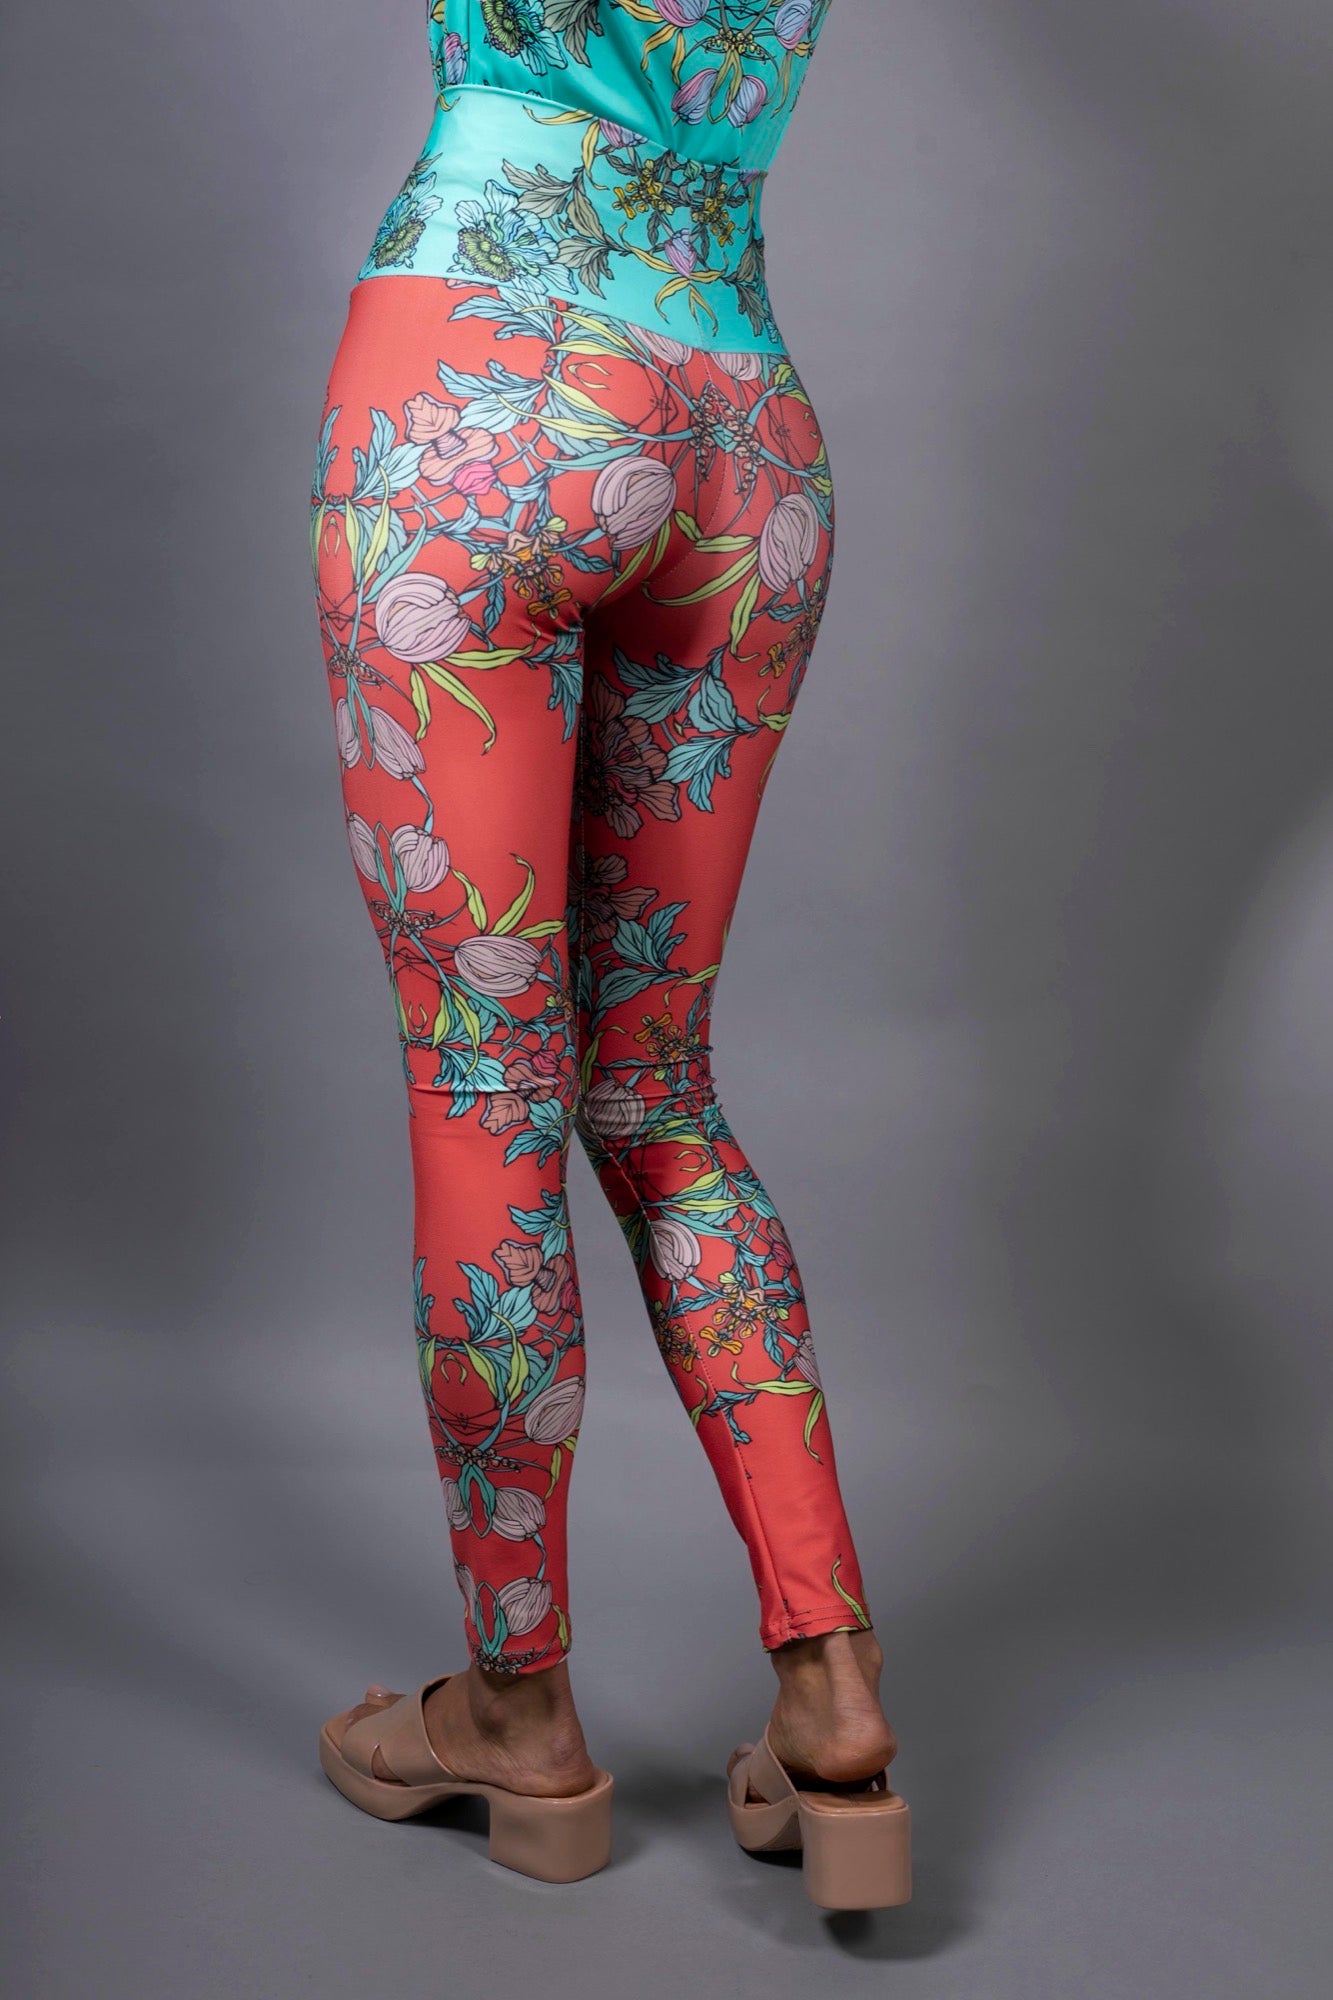 Cute Booty Lounge - Aqua Floral Extra Small - Women's Leggings Sport Booty  - Signature Scrunch Pockets: Buy Online at Best Price in UAE - Amazon.ae